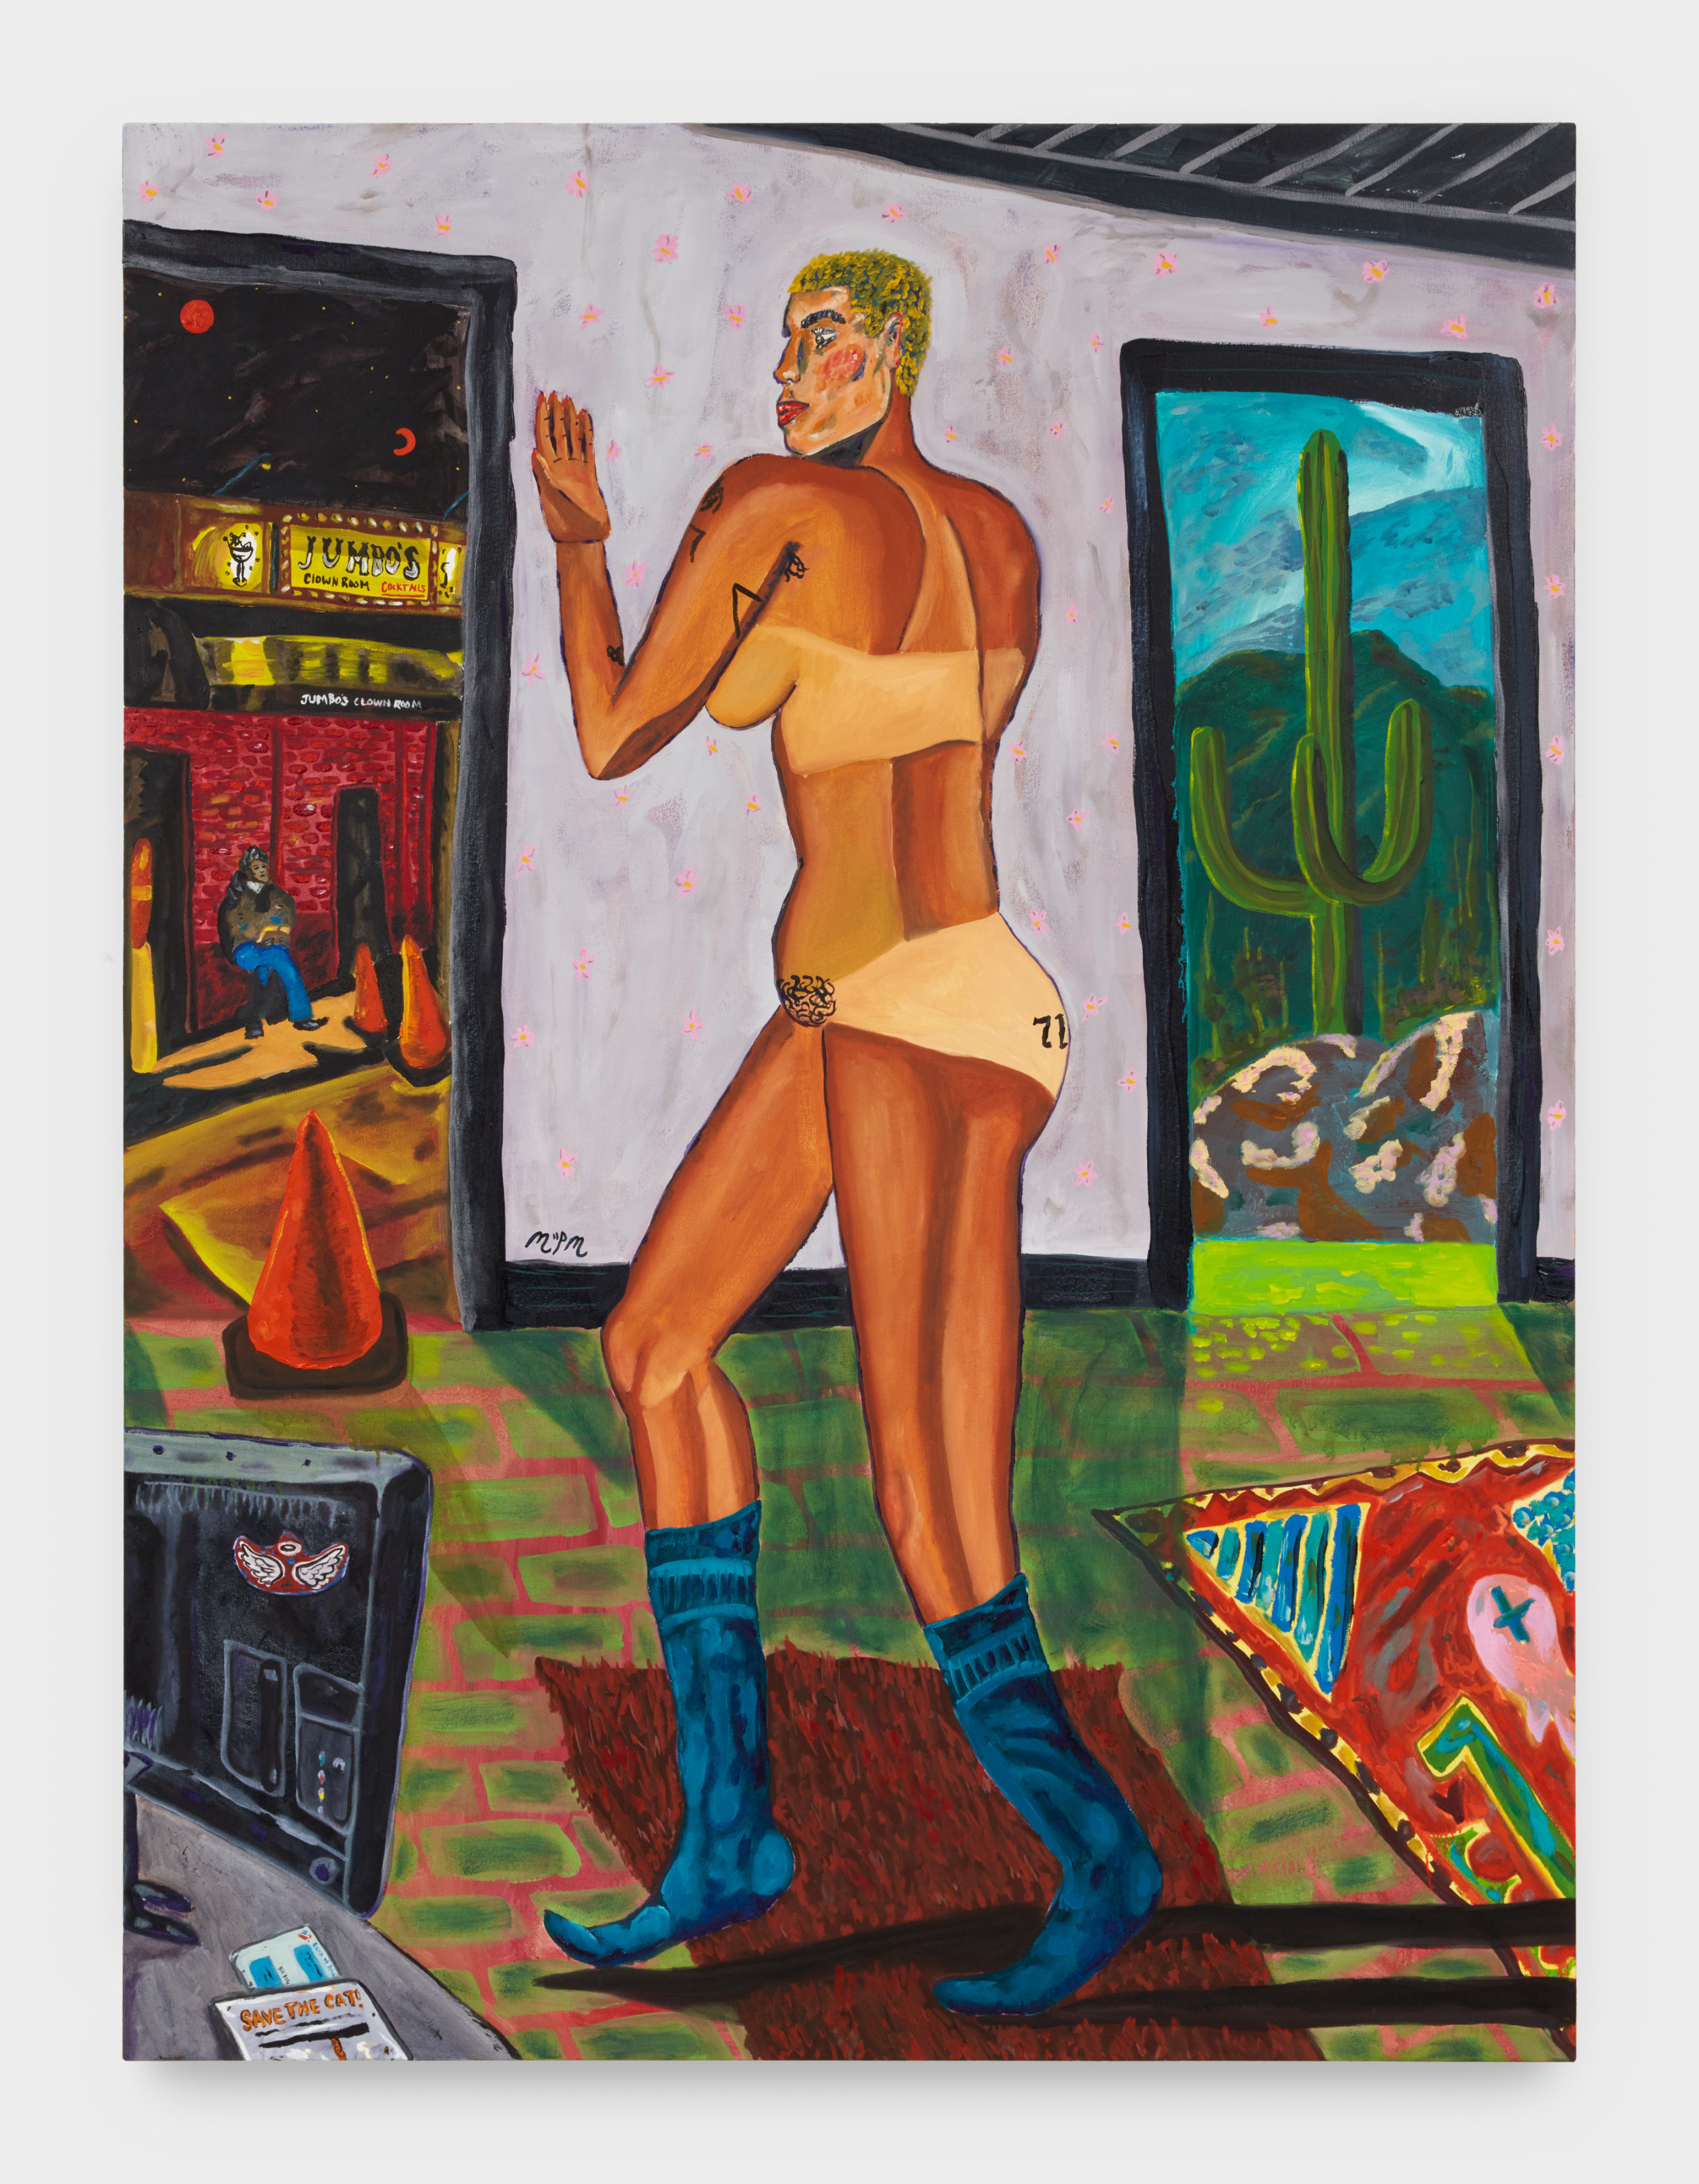 Marcel Alcalá's artwork "Duality of Story". A figure wearing nothing but blue socks looks at their hand while standing in front of two open doors one leading to the strip club jumbo's clown room and the other leading to the California wilderness. 72 x 54 in (182.9 x 137.2 cm), oil on canvas, 2023